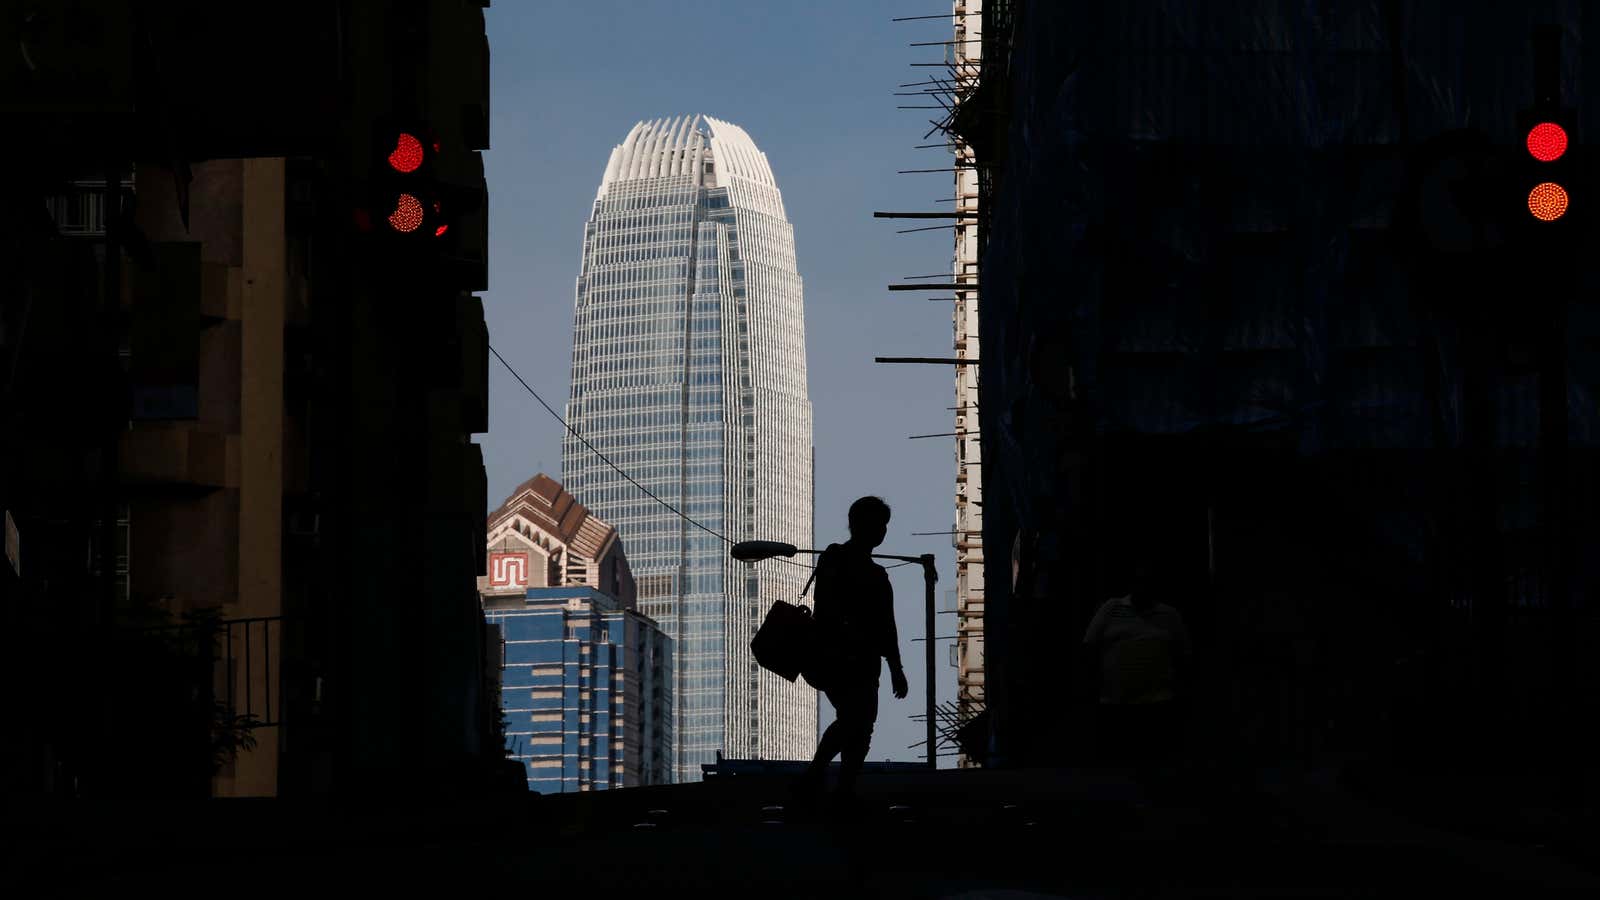 What secrets hide in Hong Kong’s office towers?